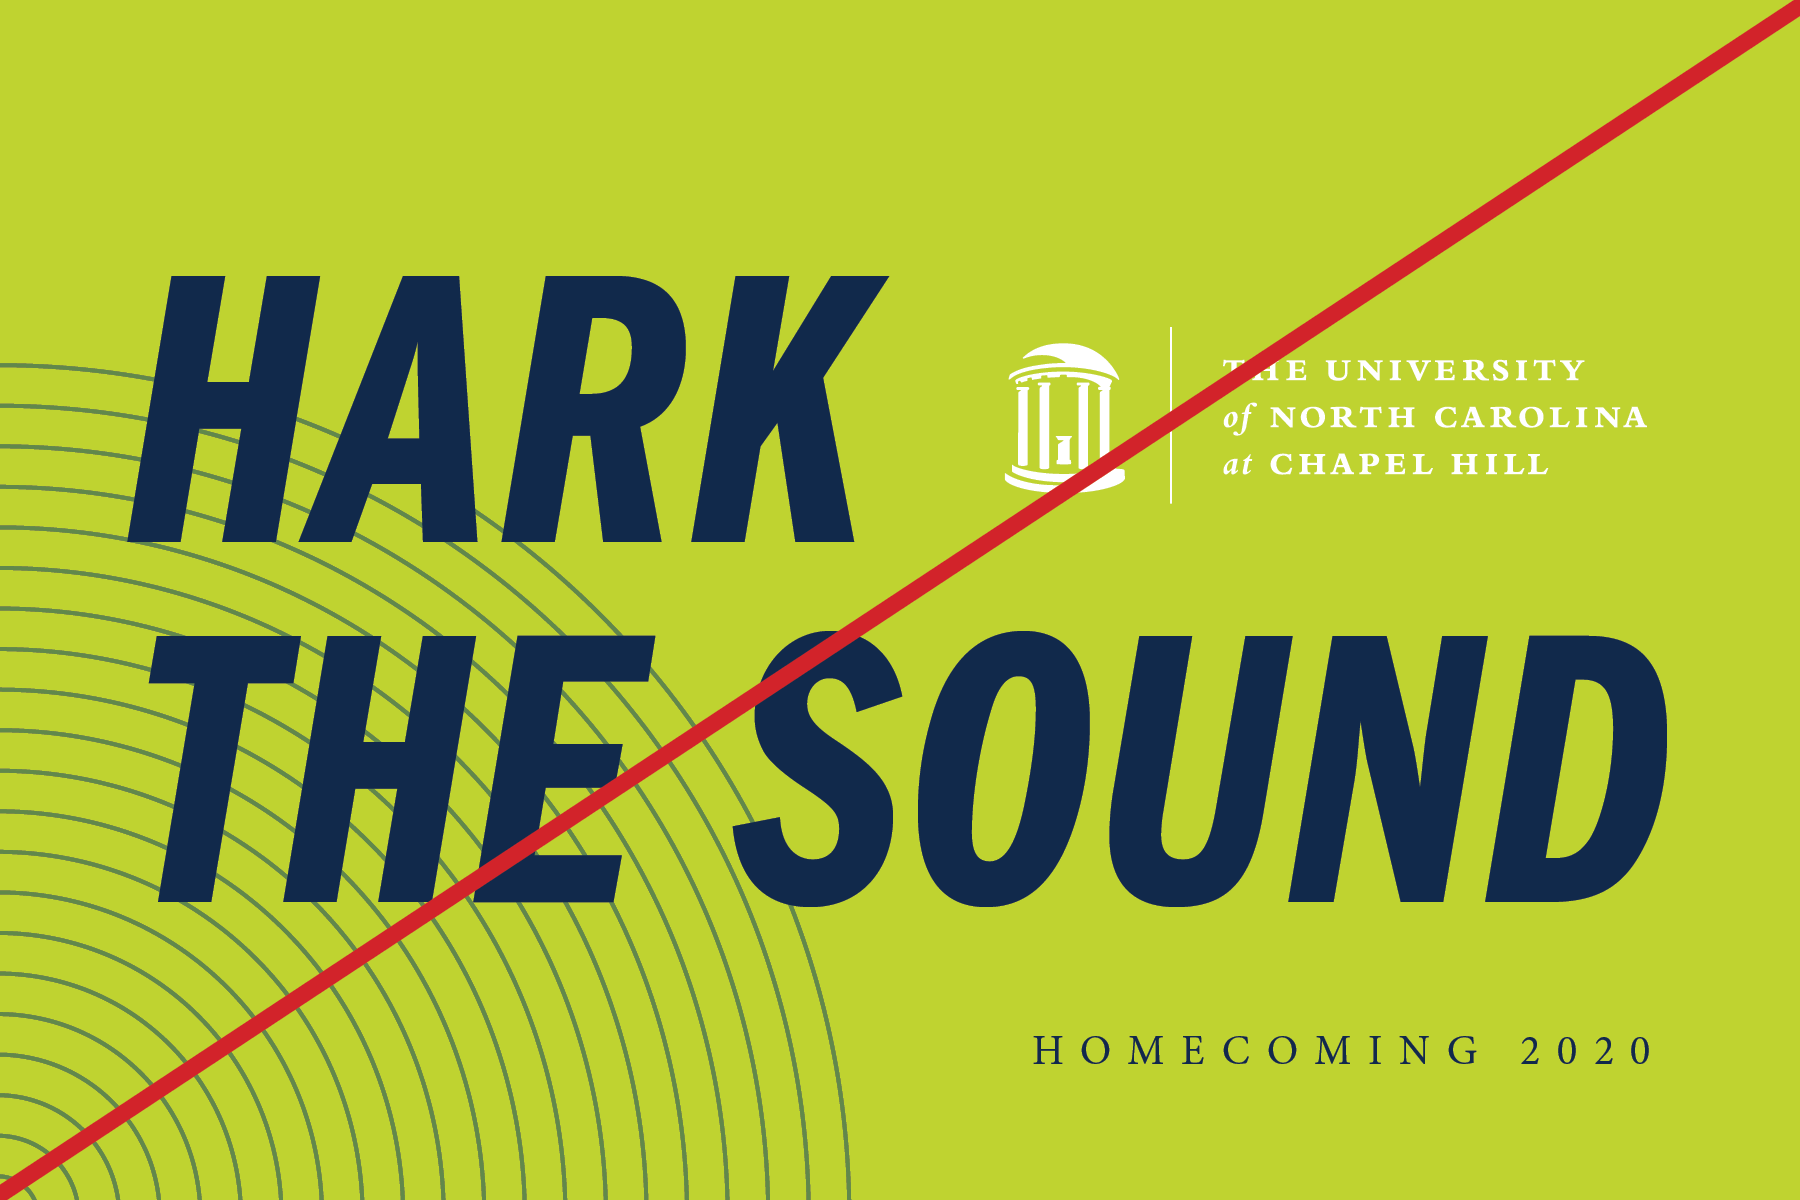 Postcard design that shows improper use of Carolina Blue. It shows the text "Hark the Sound" with the UNC log on a green background, without any Carolina Blue.